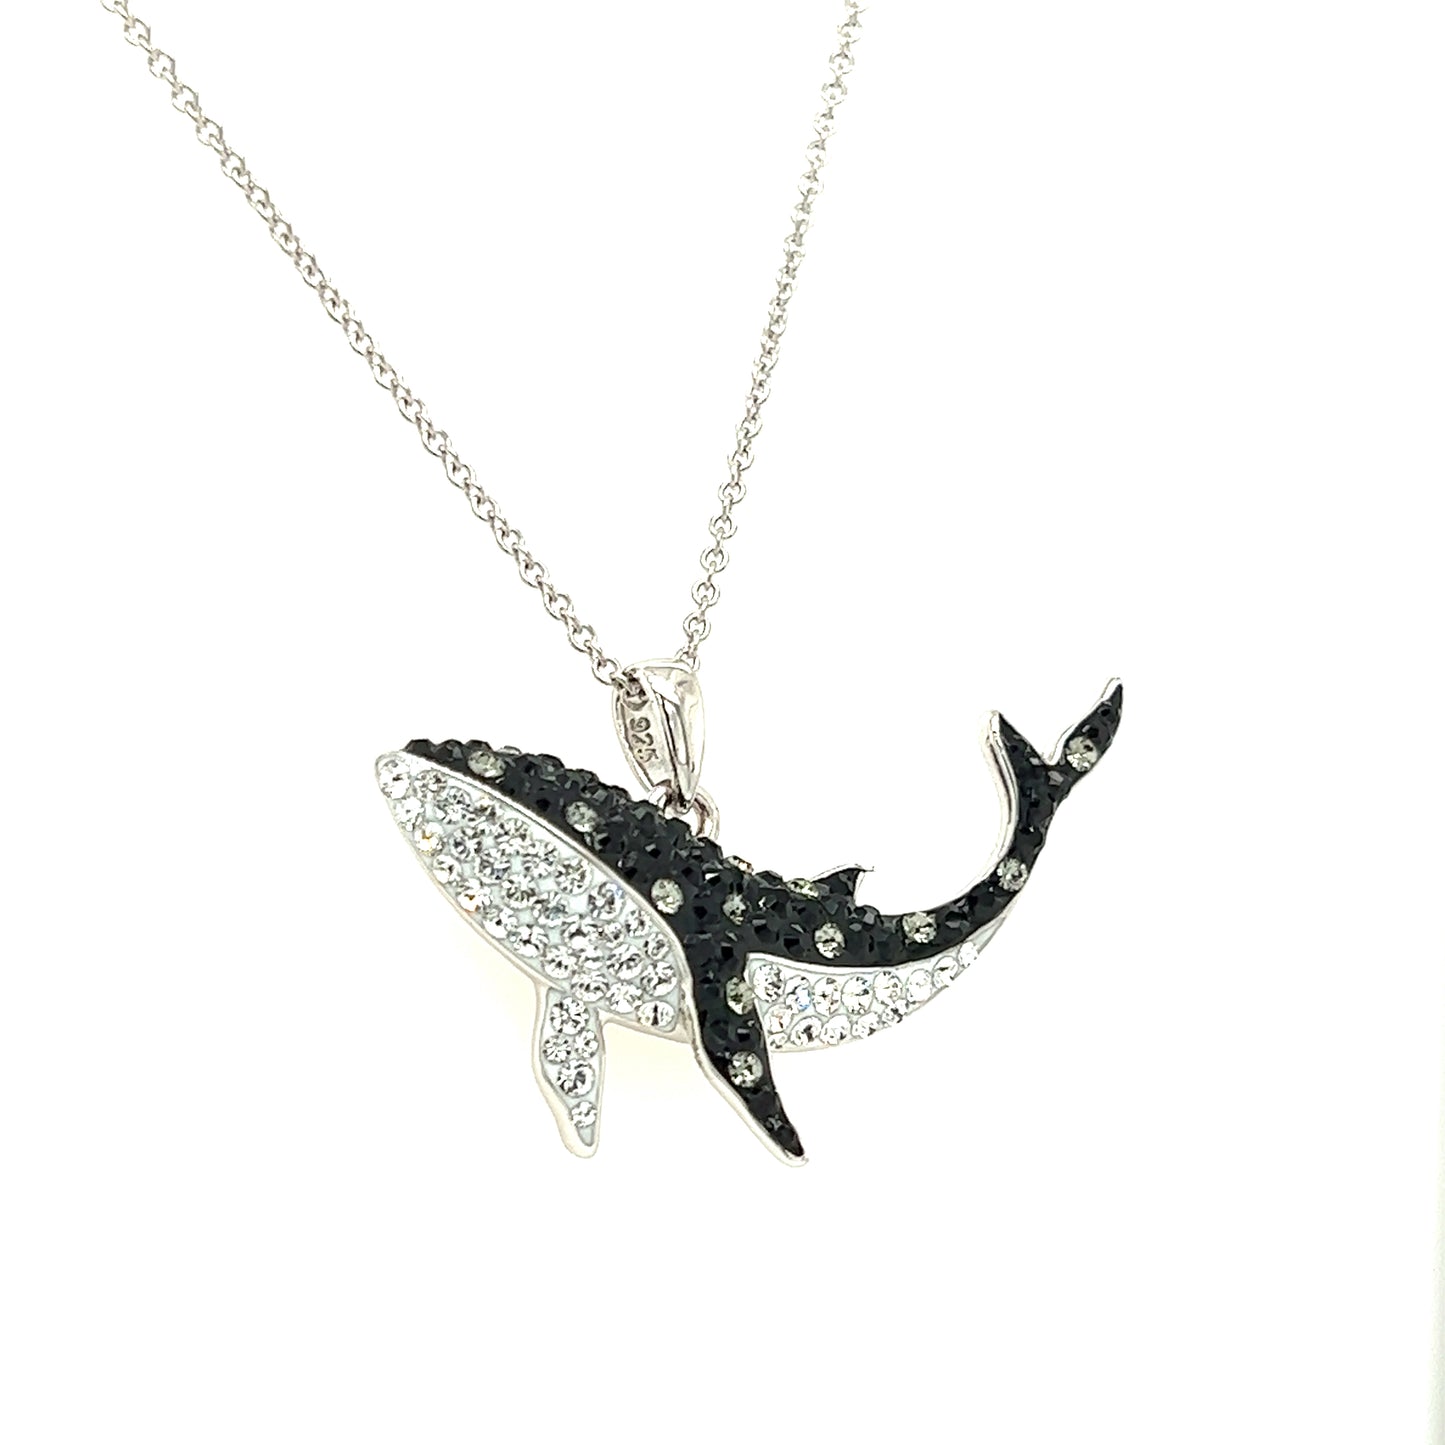 Orca Whale Necklace with Black and White Crystals in Sterling Silver Left Side View